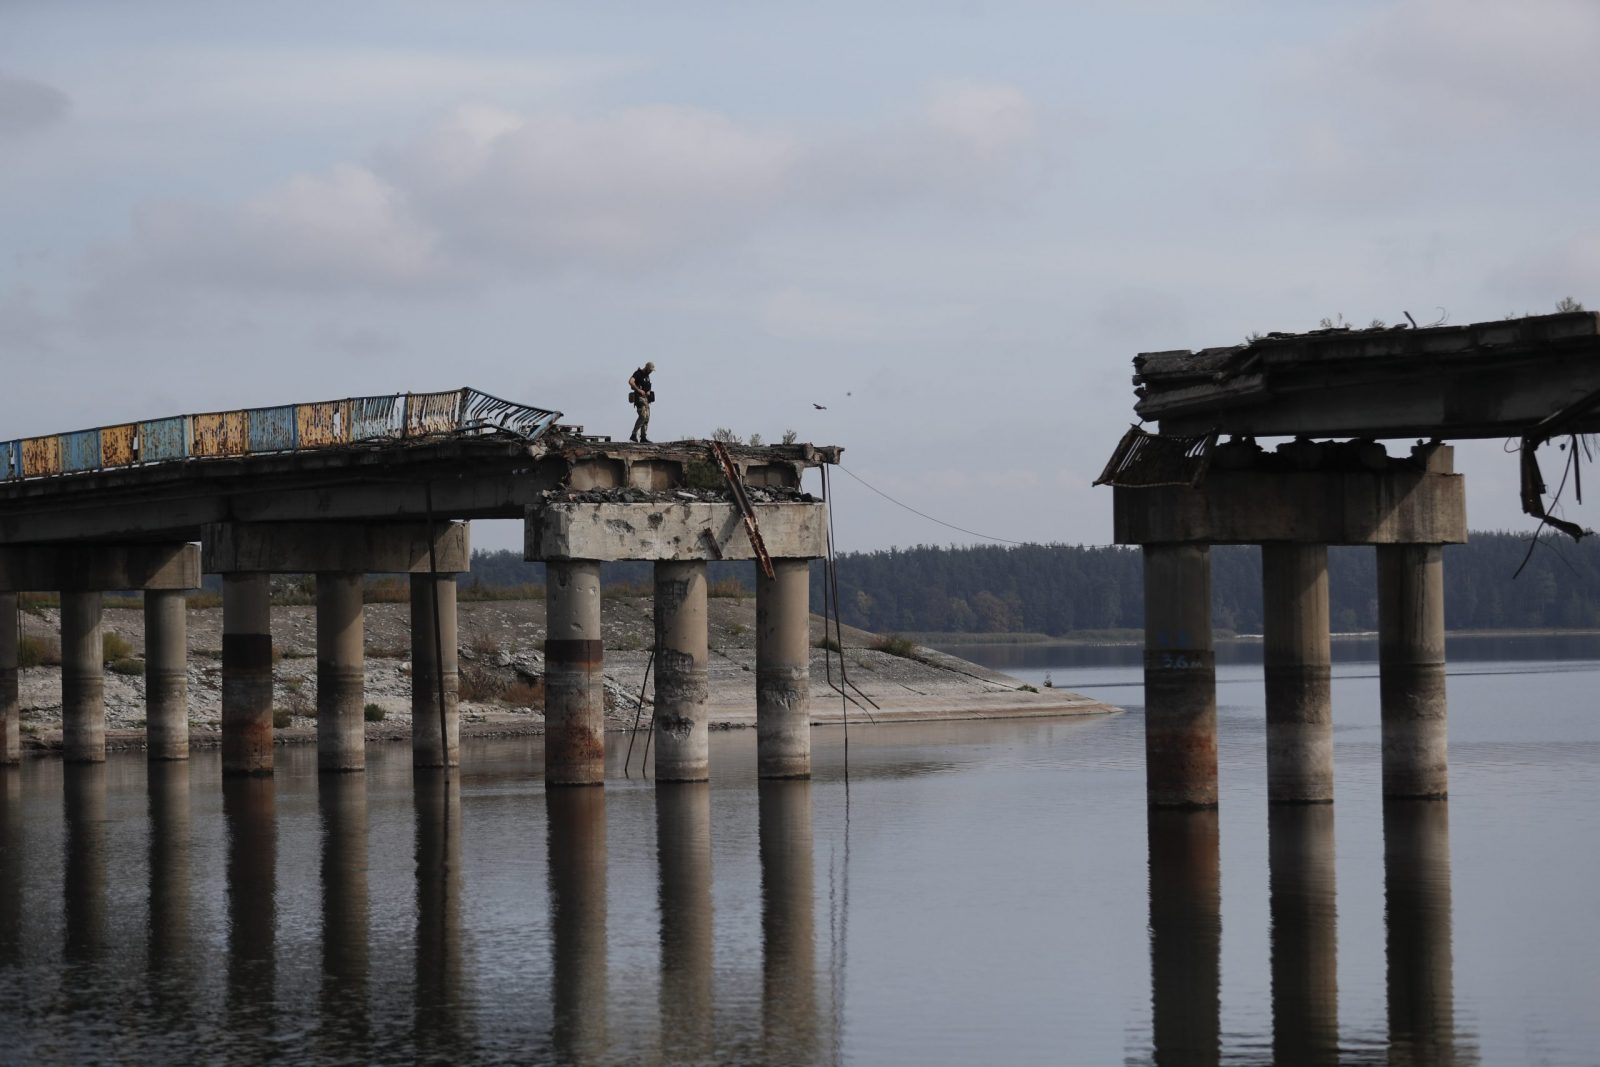 epa10221538 A Ukrainian soldier on the damaged bridge over the Siverskyi Donets river in Staryi Saltiv, the newly liberated city east of Kharkiv, Ukraine, 29 September 2022. The Ministry of Infrastructure of Ukraine reports that over 350 bridges and 49 railway bridges have been damaged, while thousands of kilometers of highways were completely destroyed in Ukraine so far during the on-going war.  EPA/ATEF SAFADI